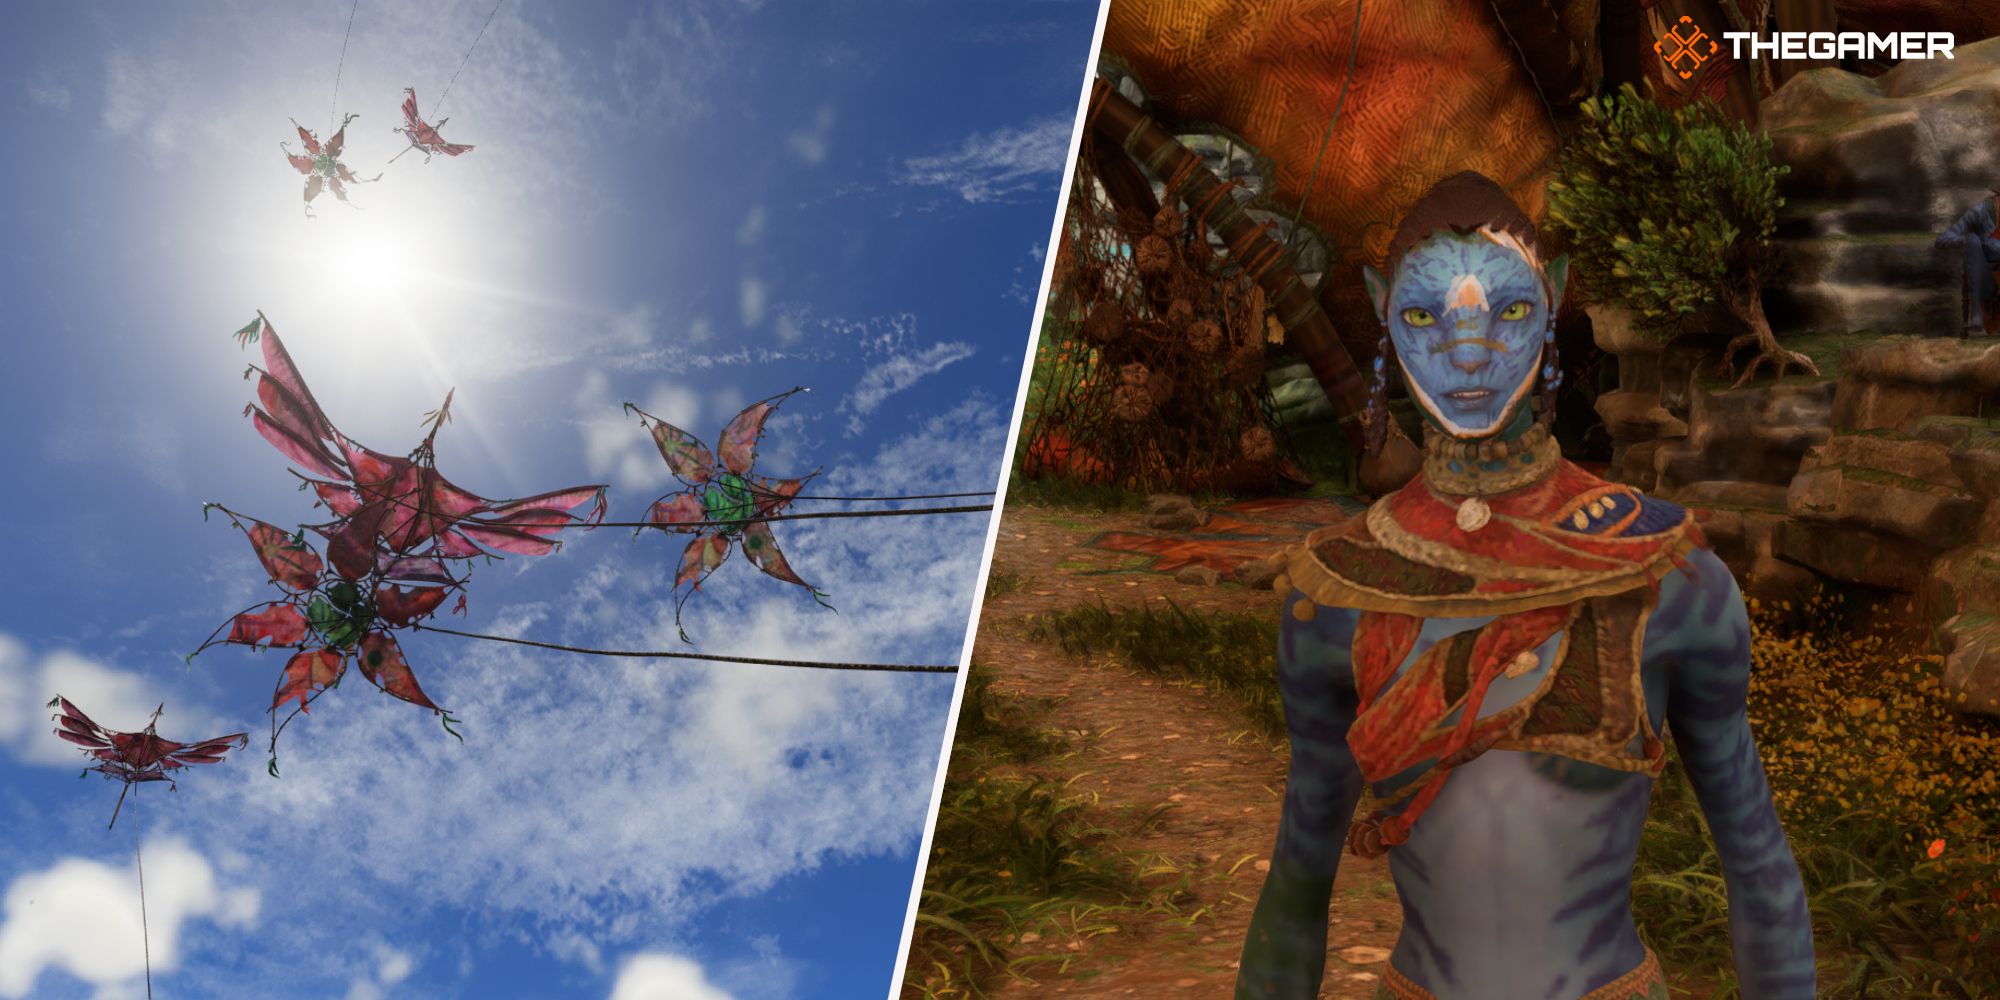 Right: A picture of Fa'zak - Left: A picture of flying kites Avatar Frontiers of Pandora